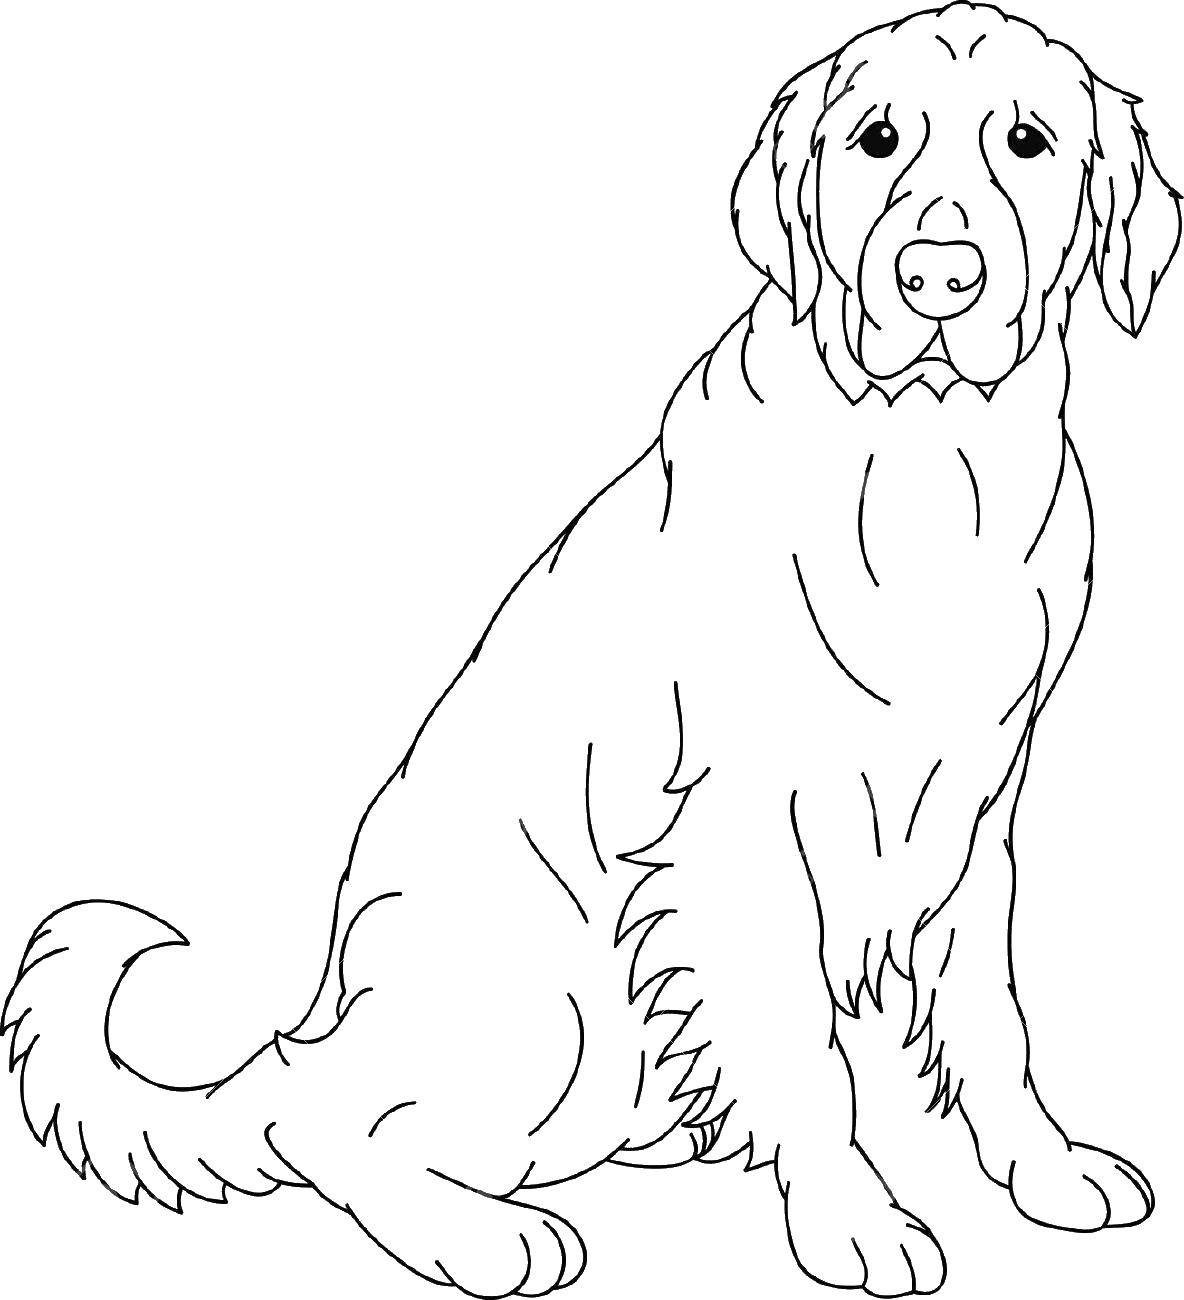 Coloring Fluffy dog.. Category Animals. Tags:  Animals, dog.